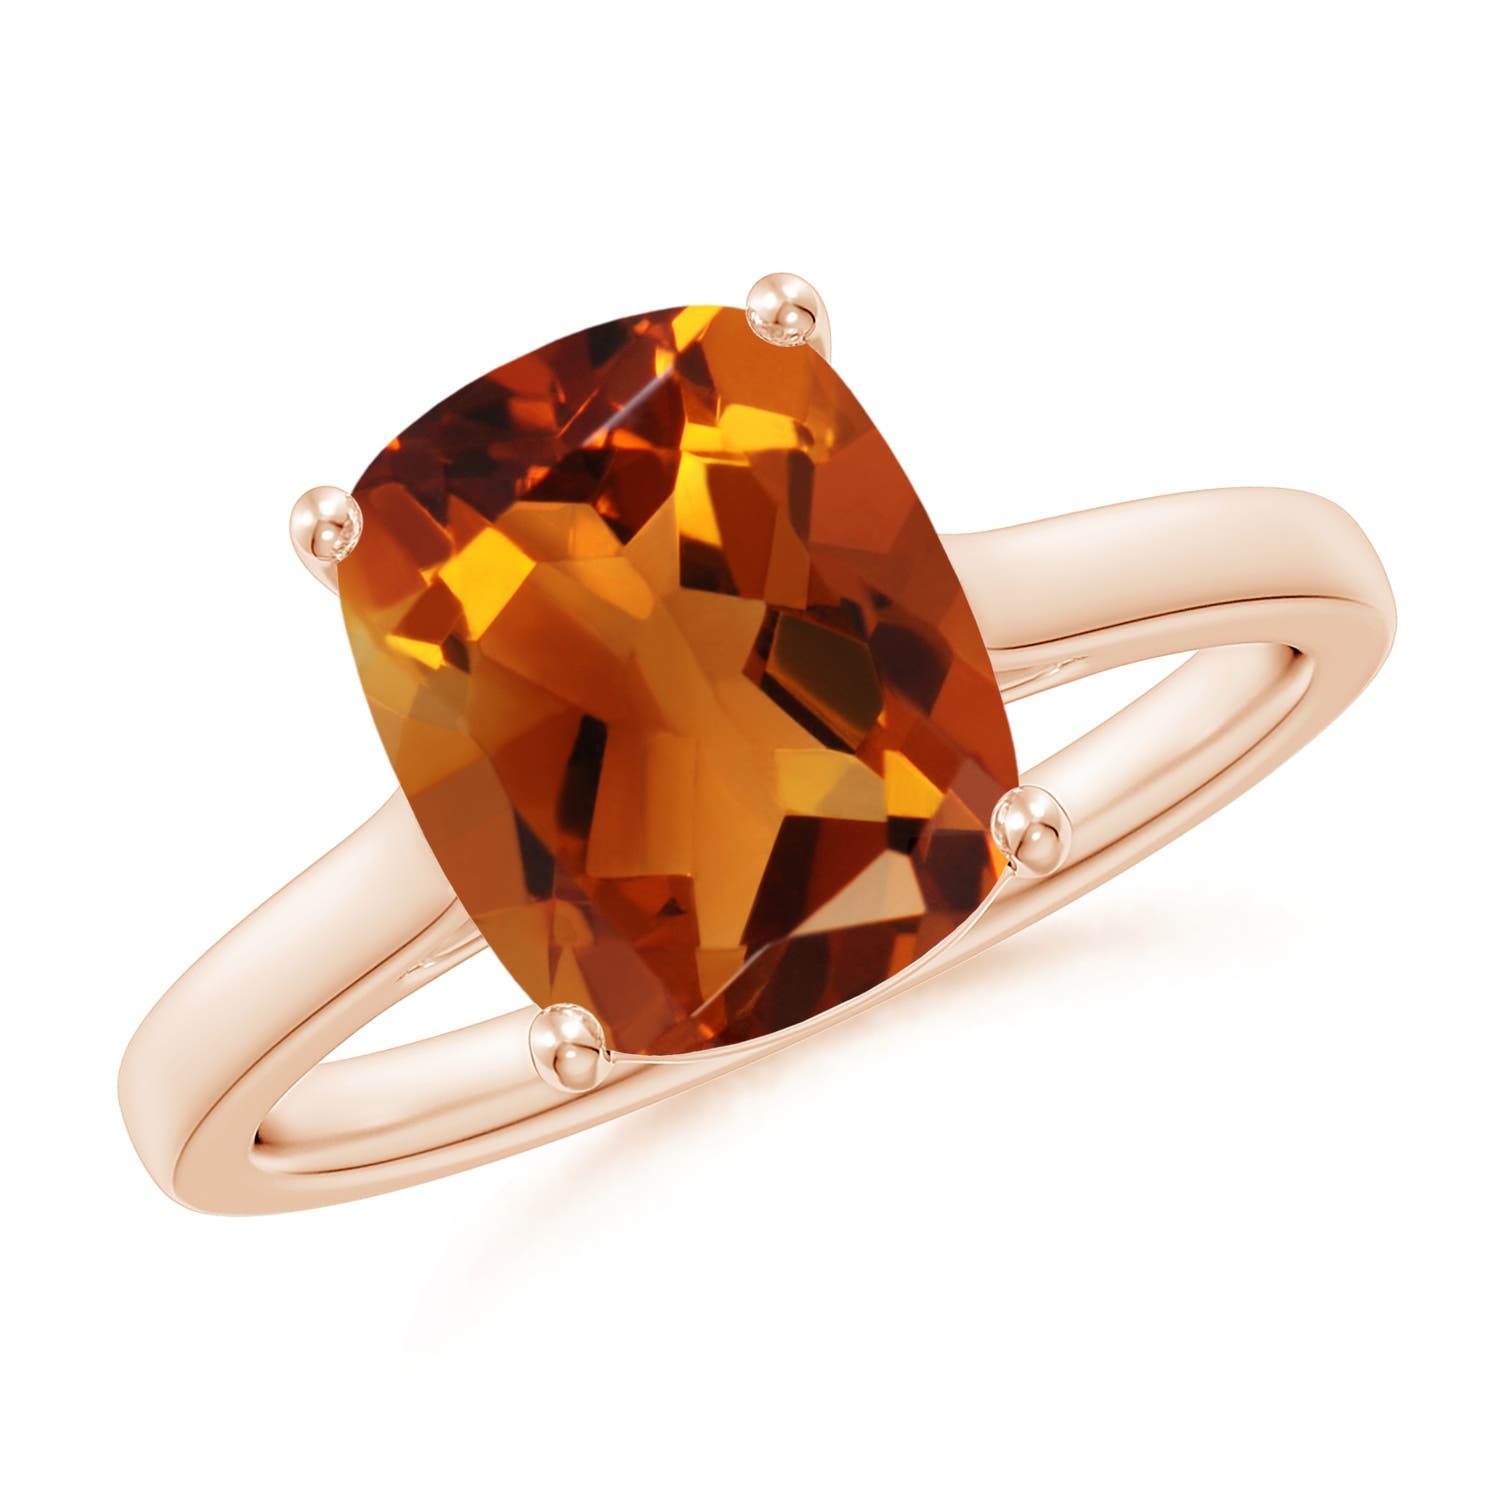 AAAA - Citrine / 2.67 CT / 14 KT Rose Gold